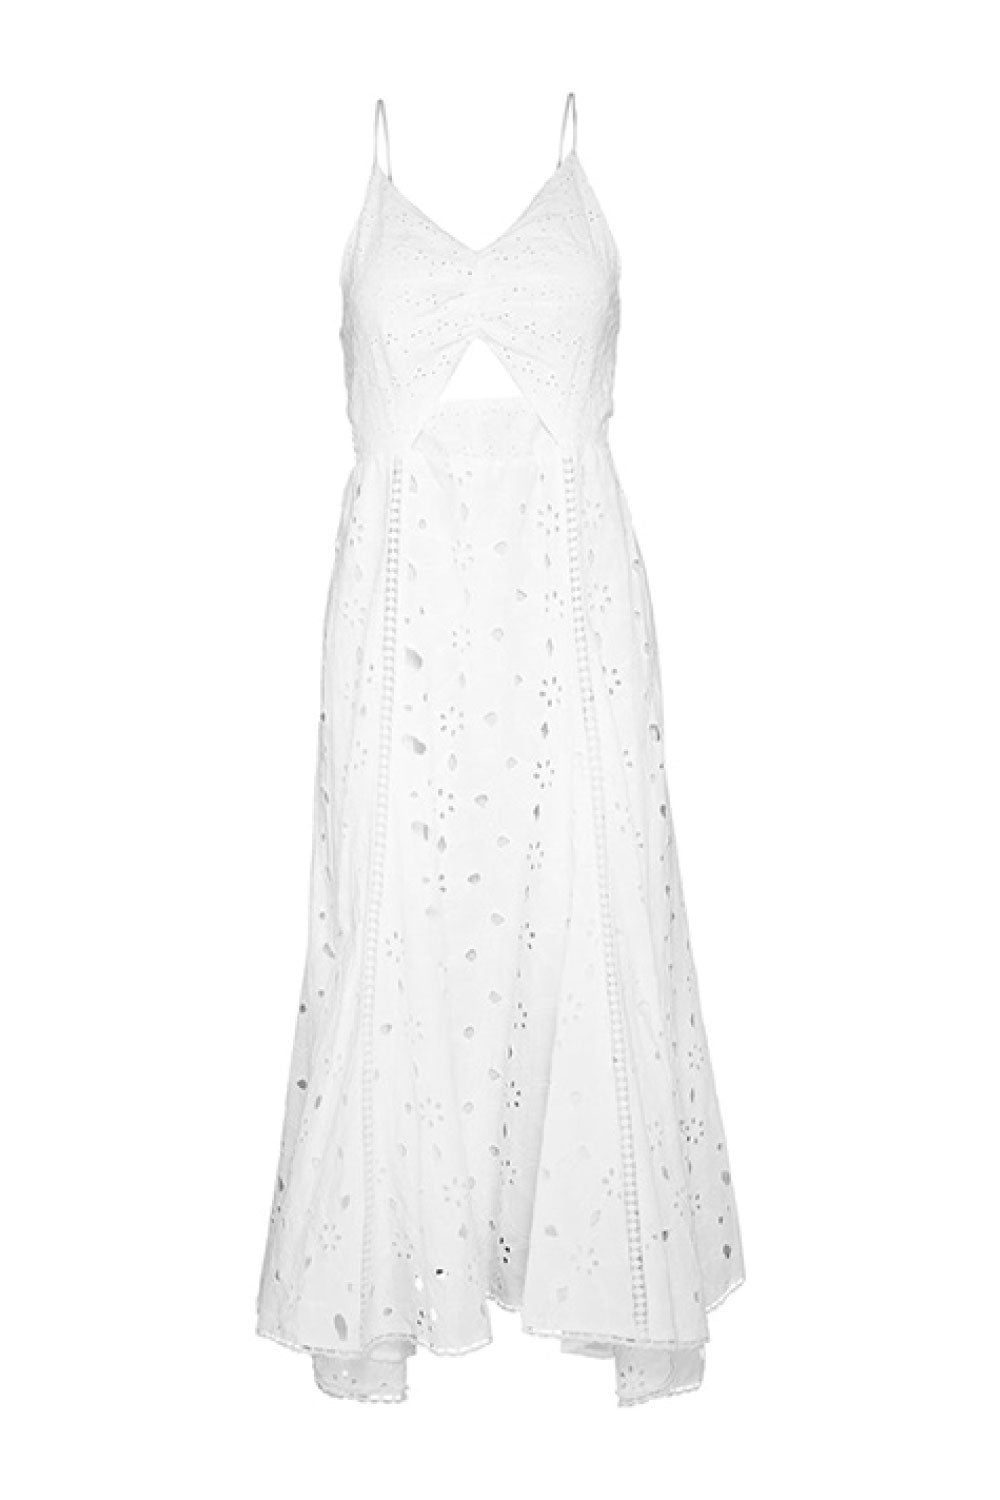 Image of the front of the Filomena Dress in White.